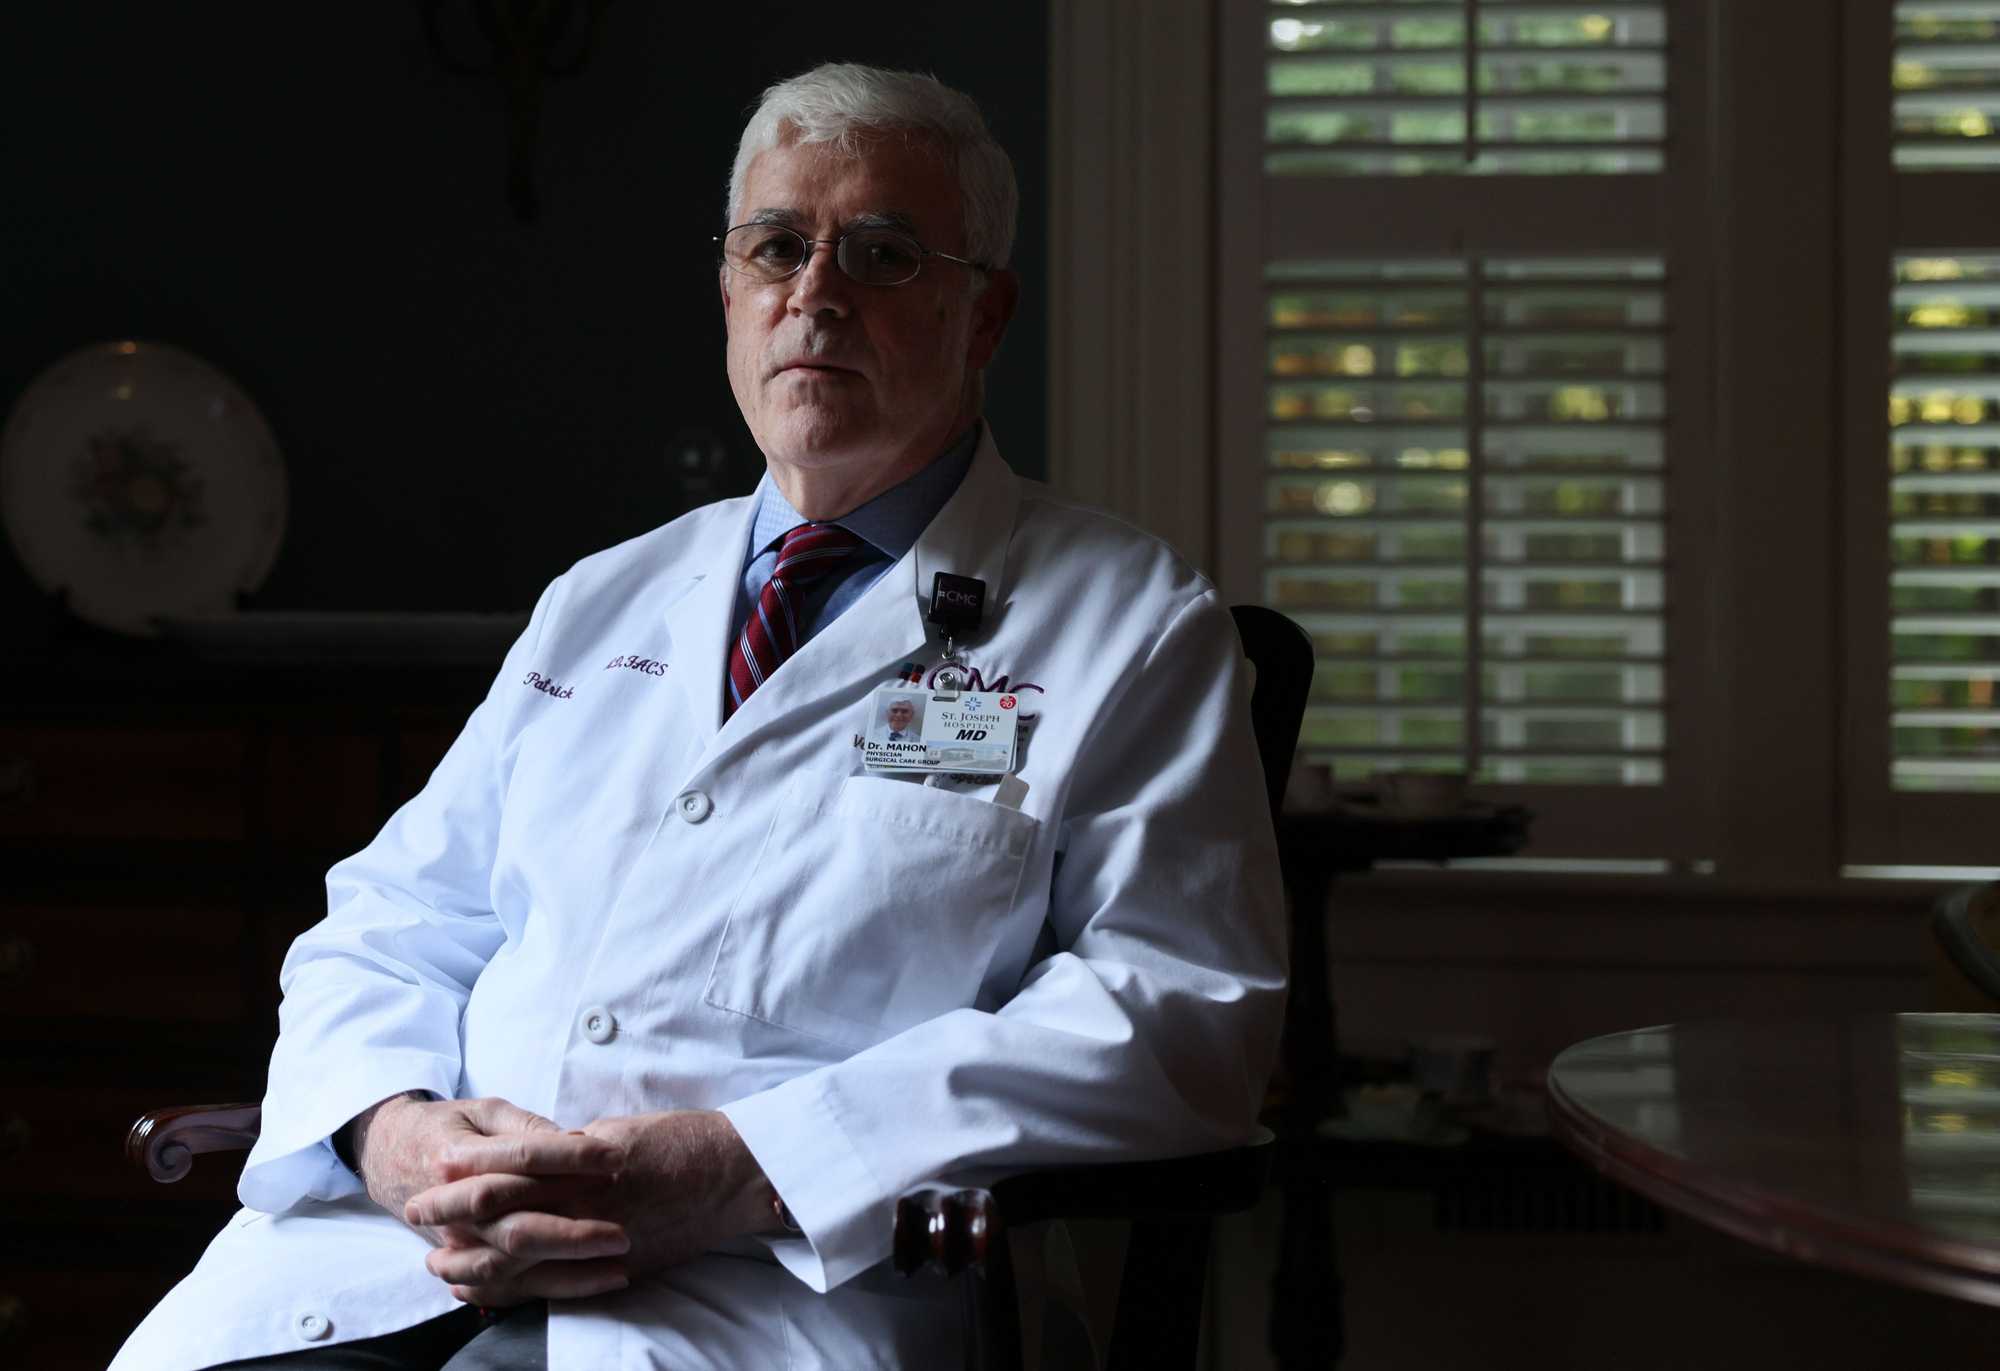 Dr. Patrick Mahon, a longtime vascular surgeon at Catholic Medical Center, said he faced retaliation from administration officials after he had looked into allegations involving Dr. Baribeau. 